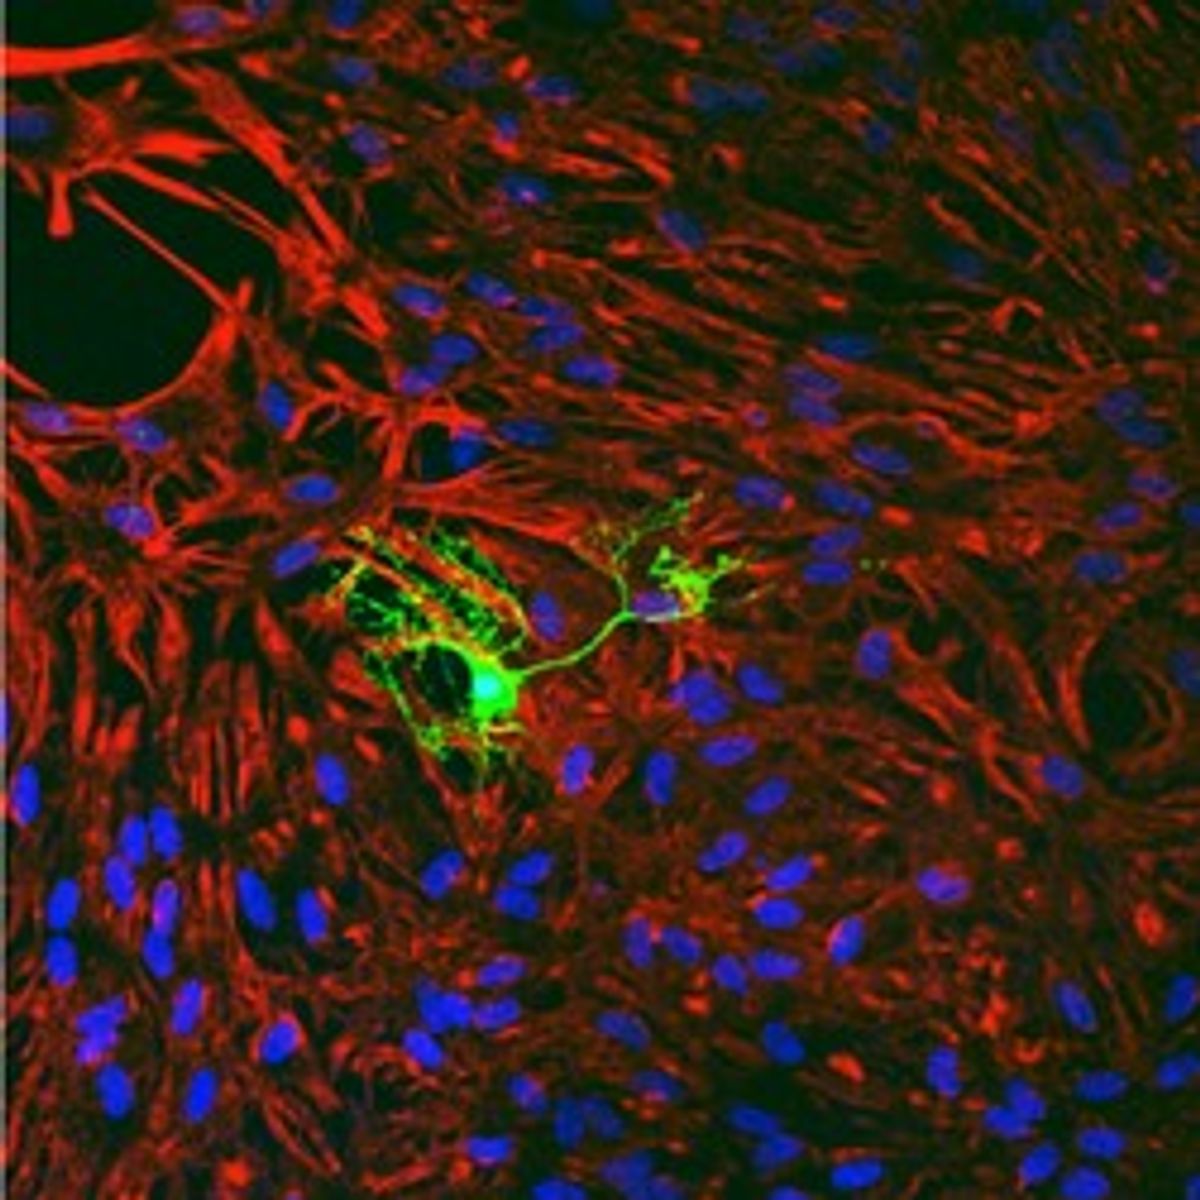 Microscopy image of a fluorescent green oligodendrocyte surrounded by astrocytes stained red with blue nuclei.